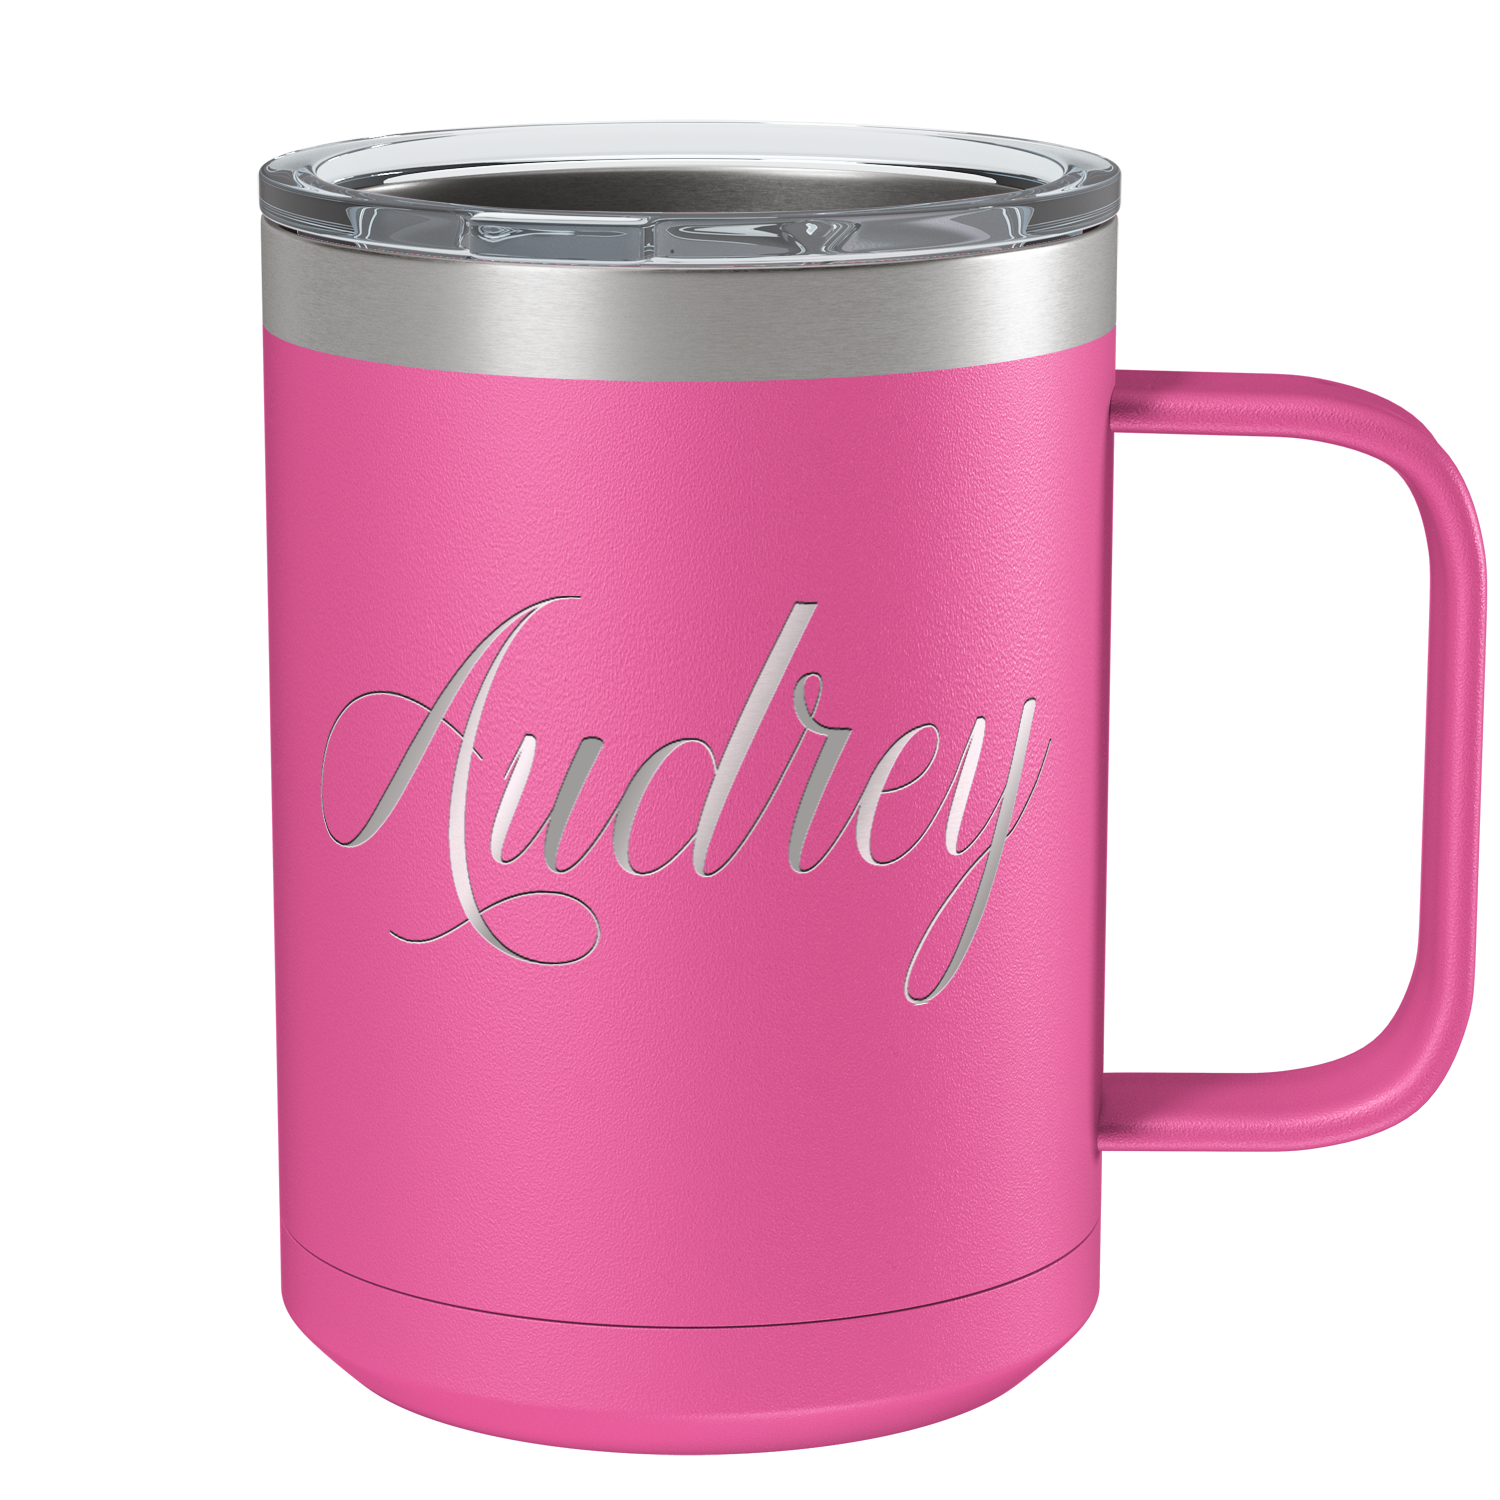 Cuptify Personalized Engraved 15 oz Stainless Steel Coffee Mug - Pink